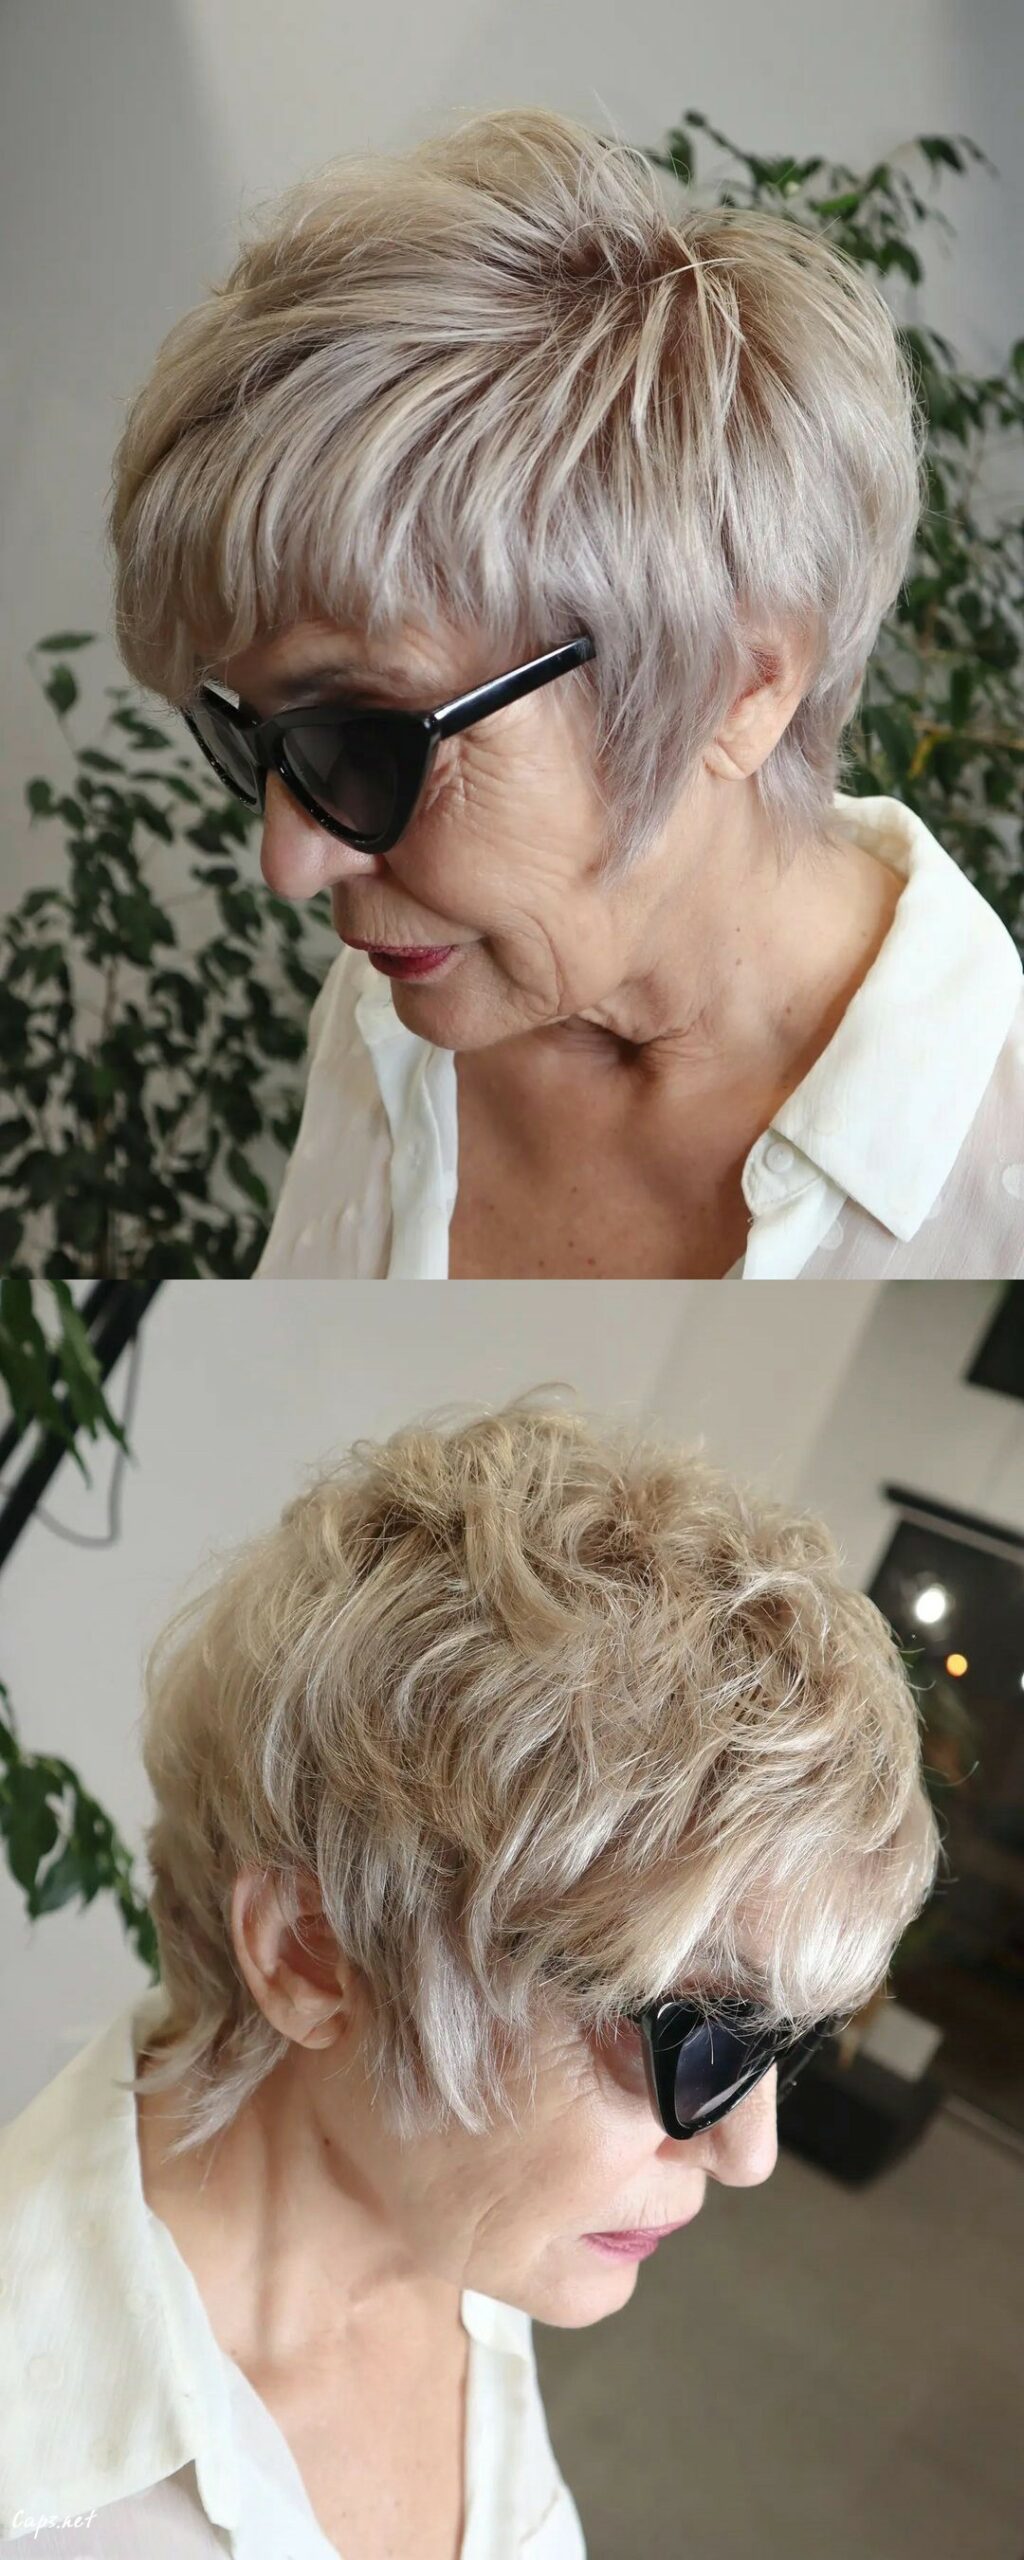 sassy pixie mullet for thick hair on a woman in her sixties